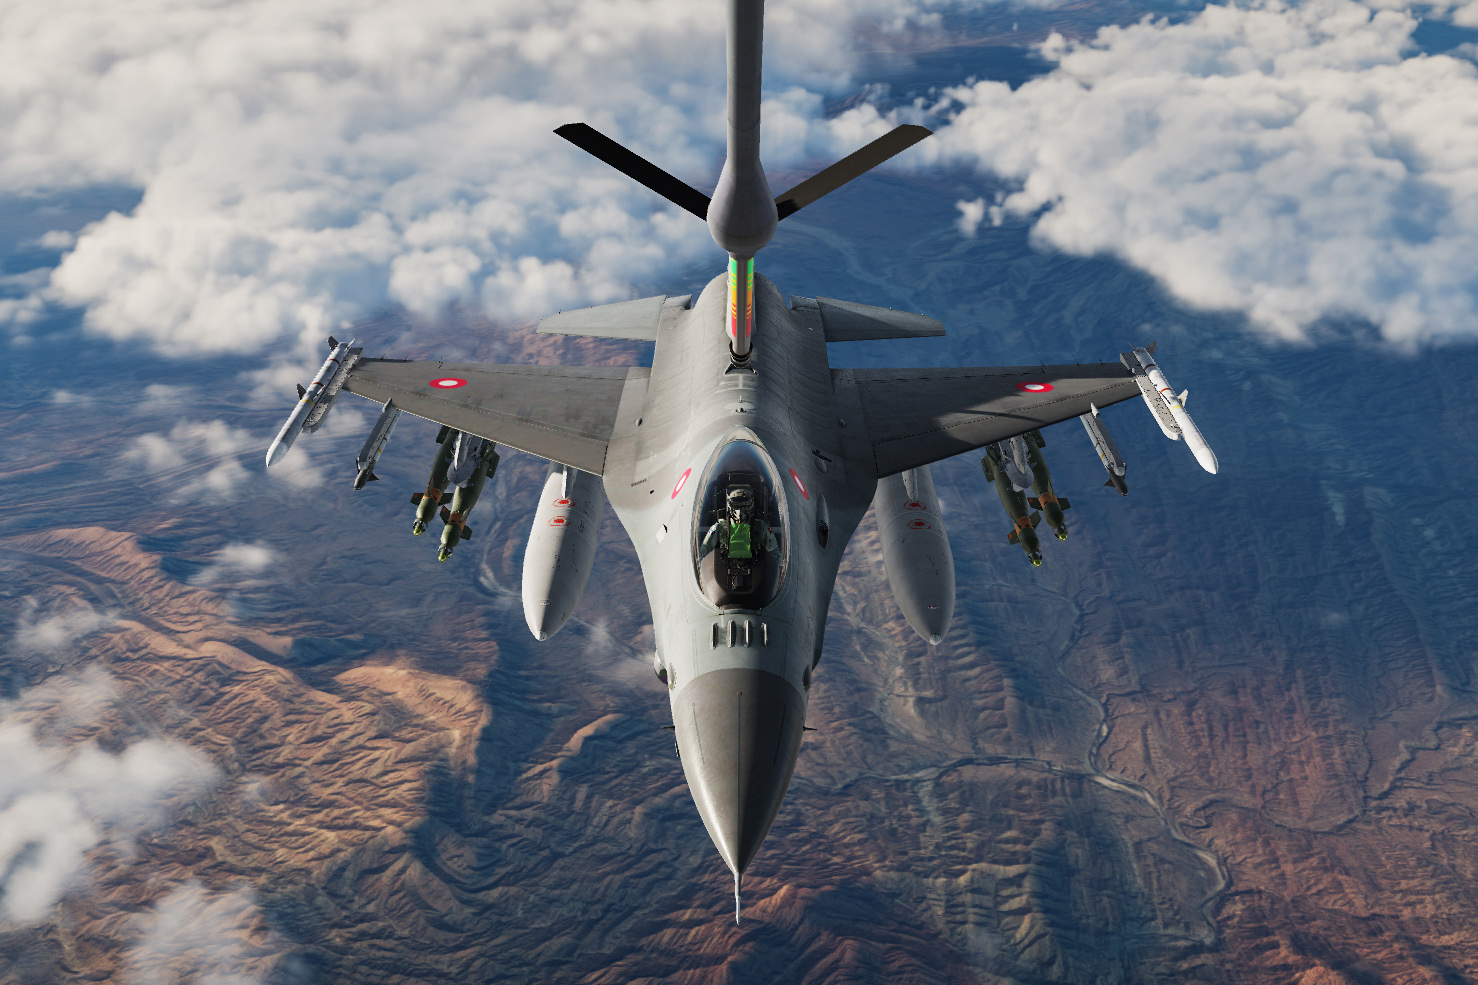 RDAF F-16A block 20 MLU E-070 (Controlled Ejection)